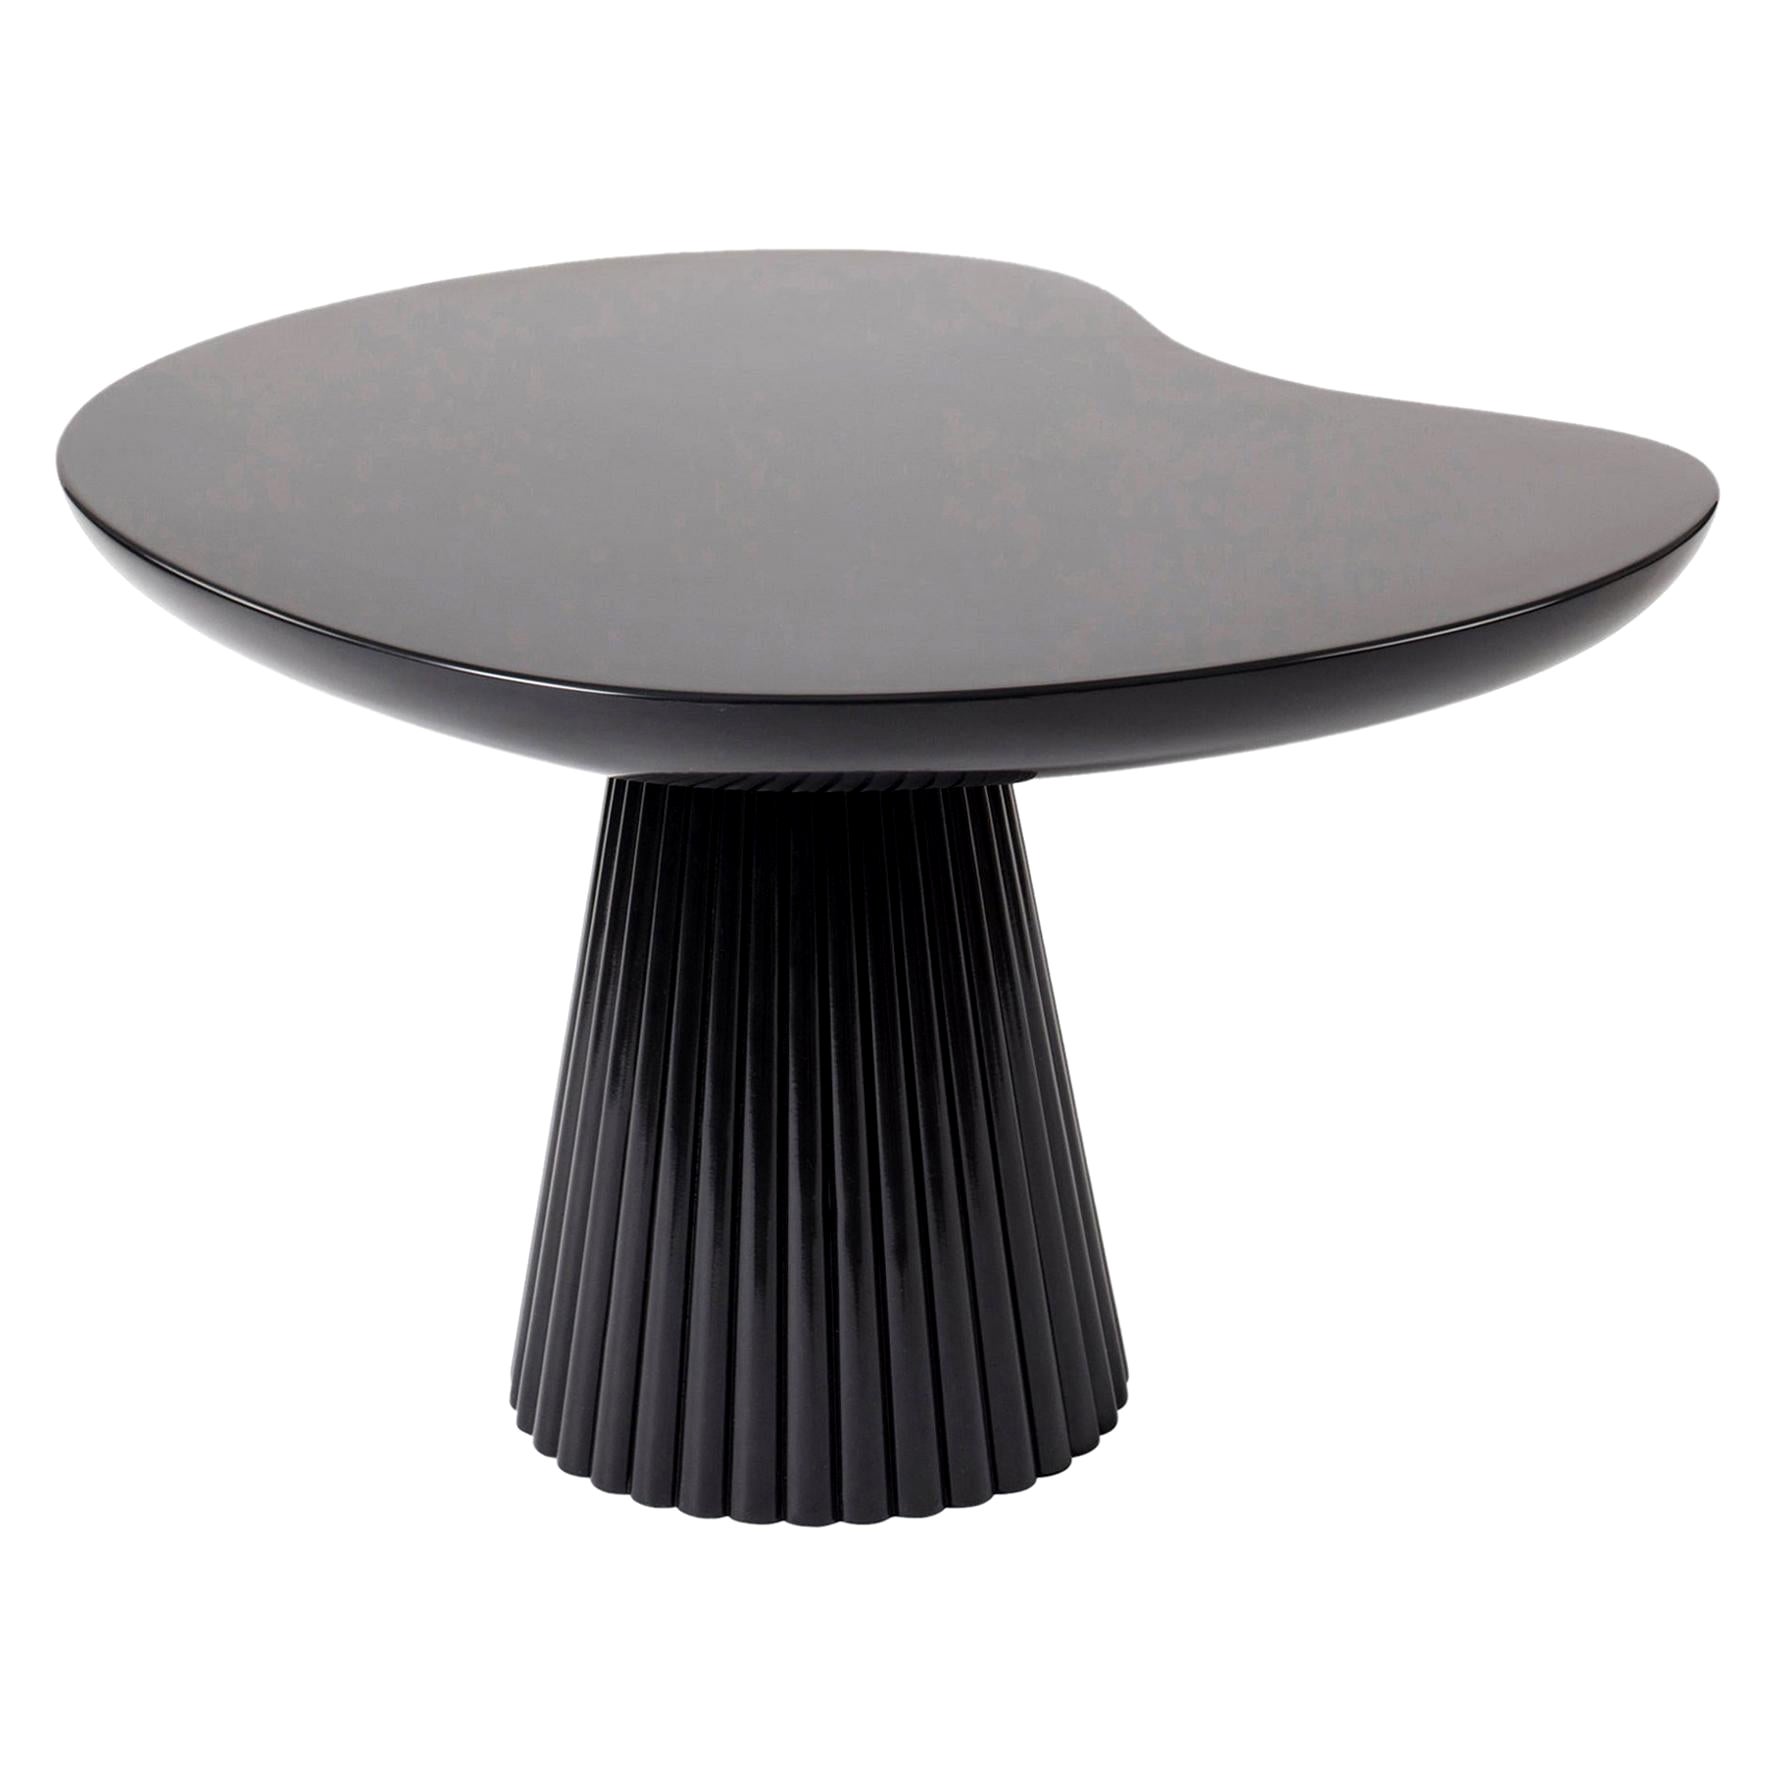 Homage to Miro Table by Thomas Dariel For Sale